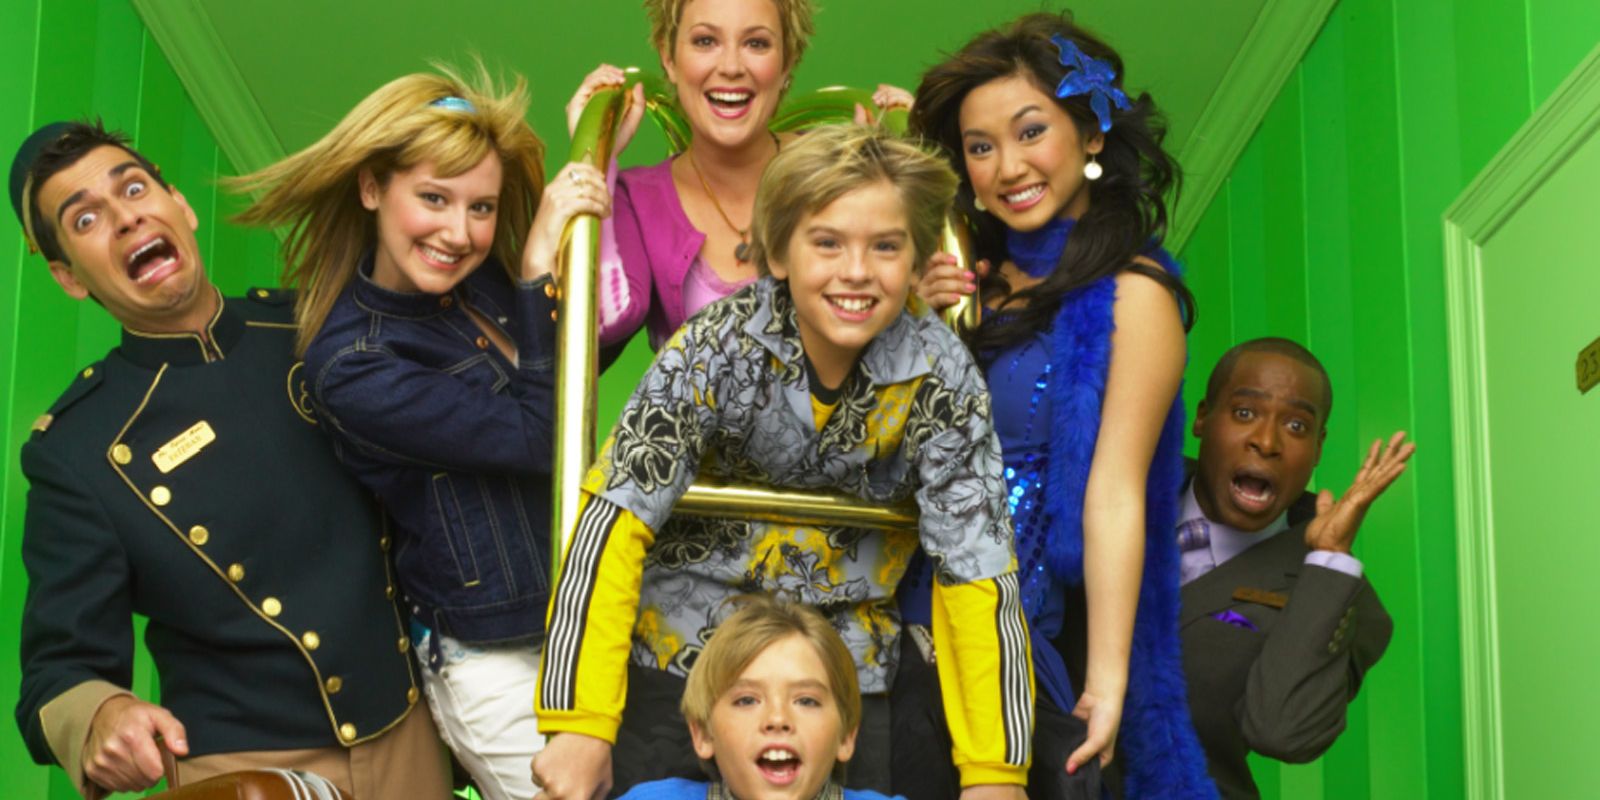 The cast of The Suite Life of Zack and Cody TV series